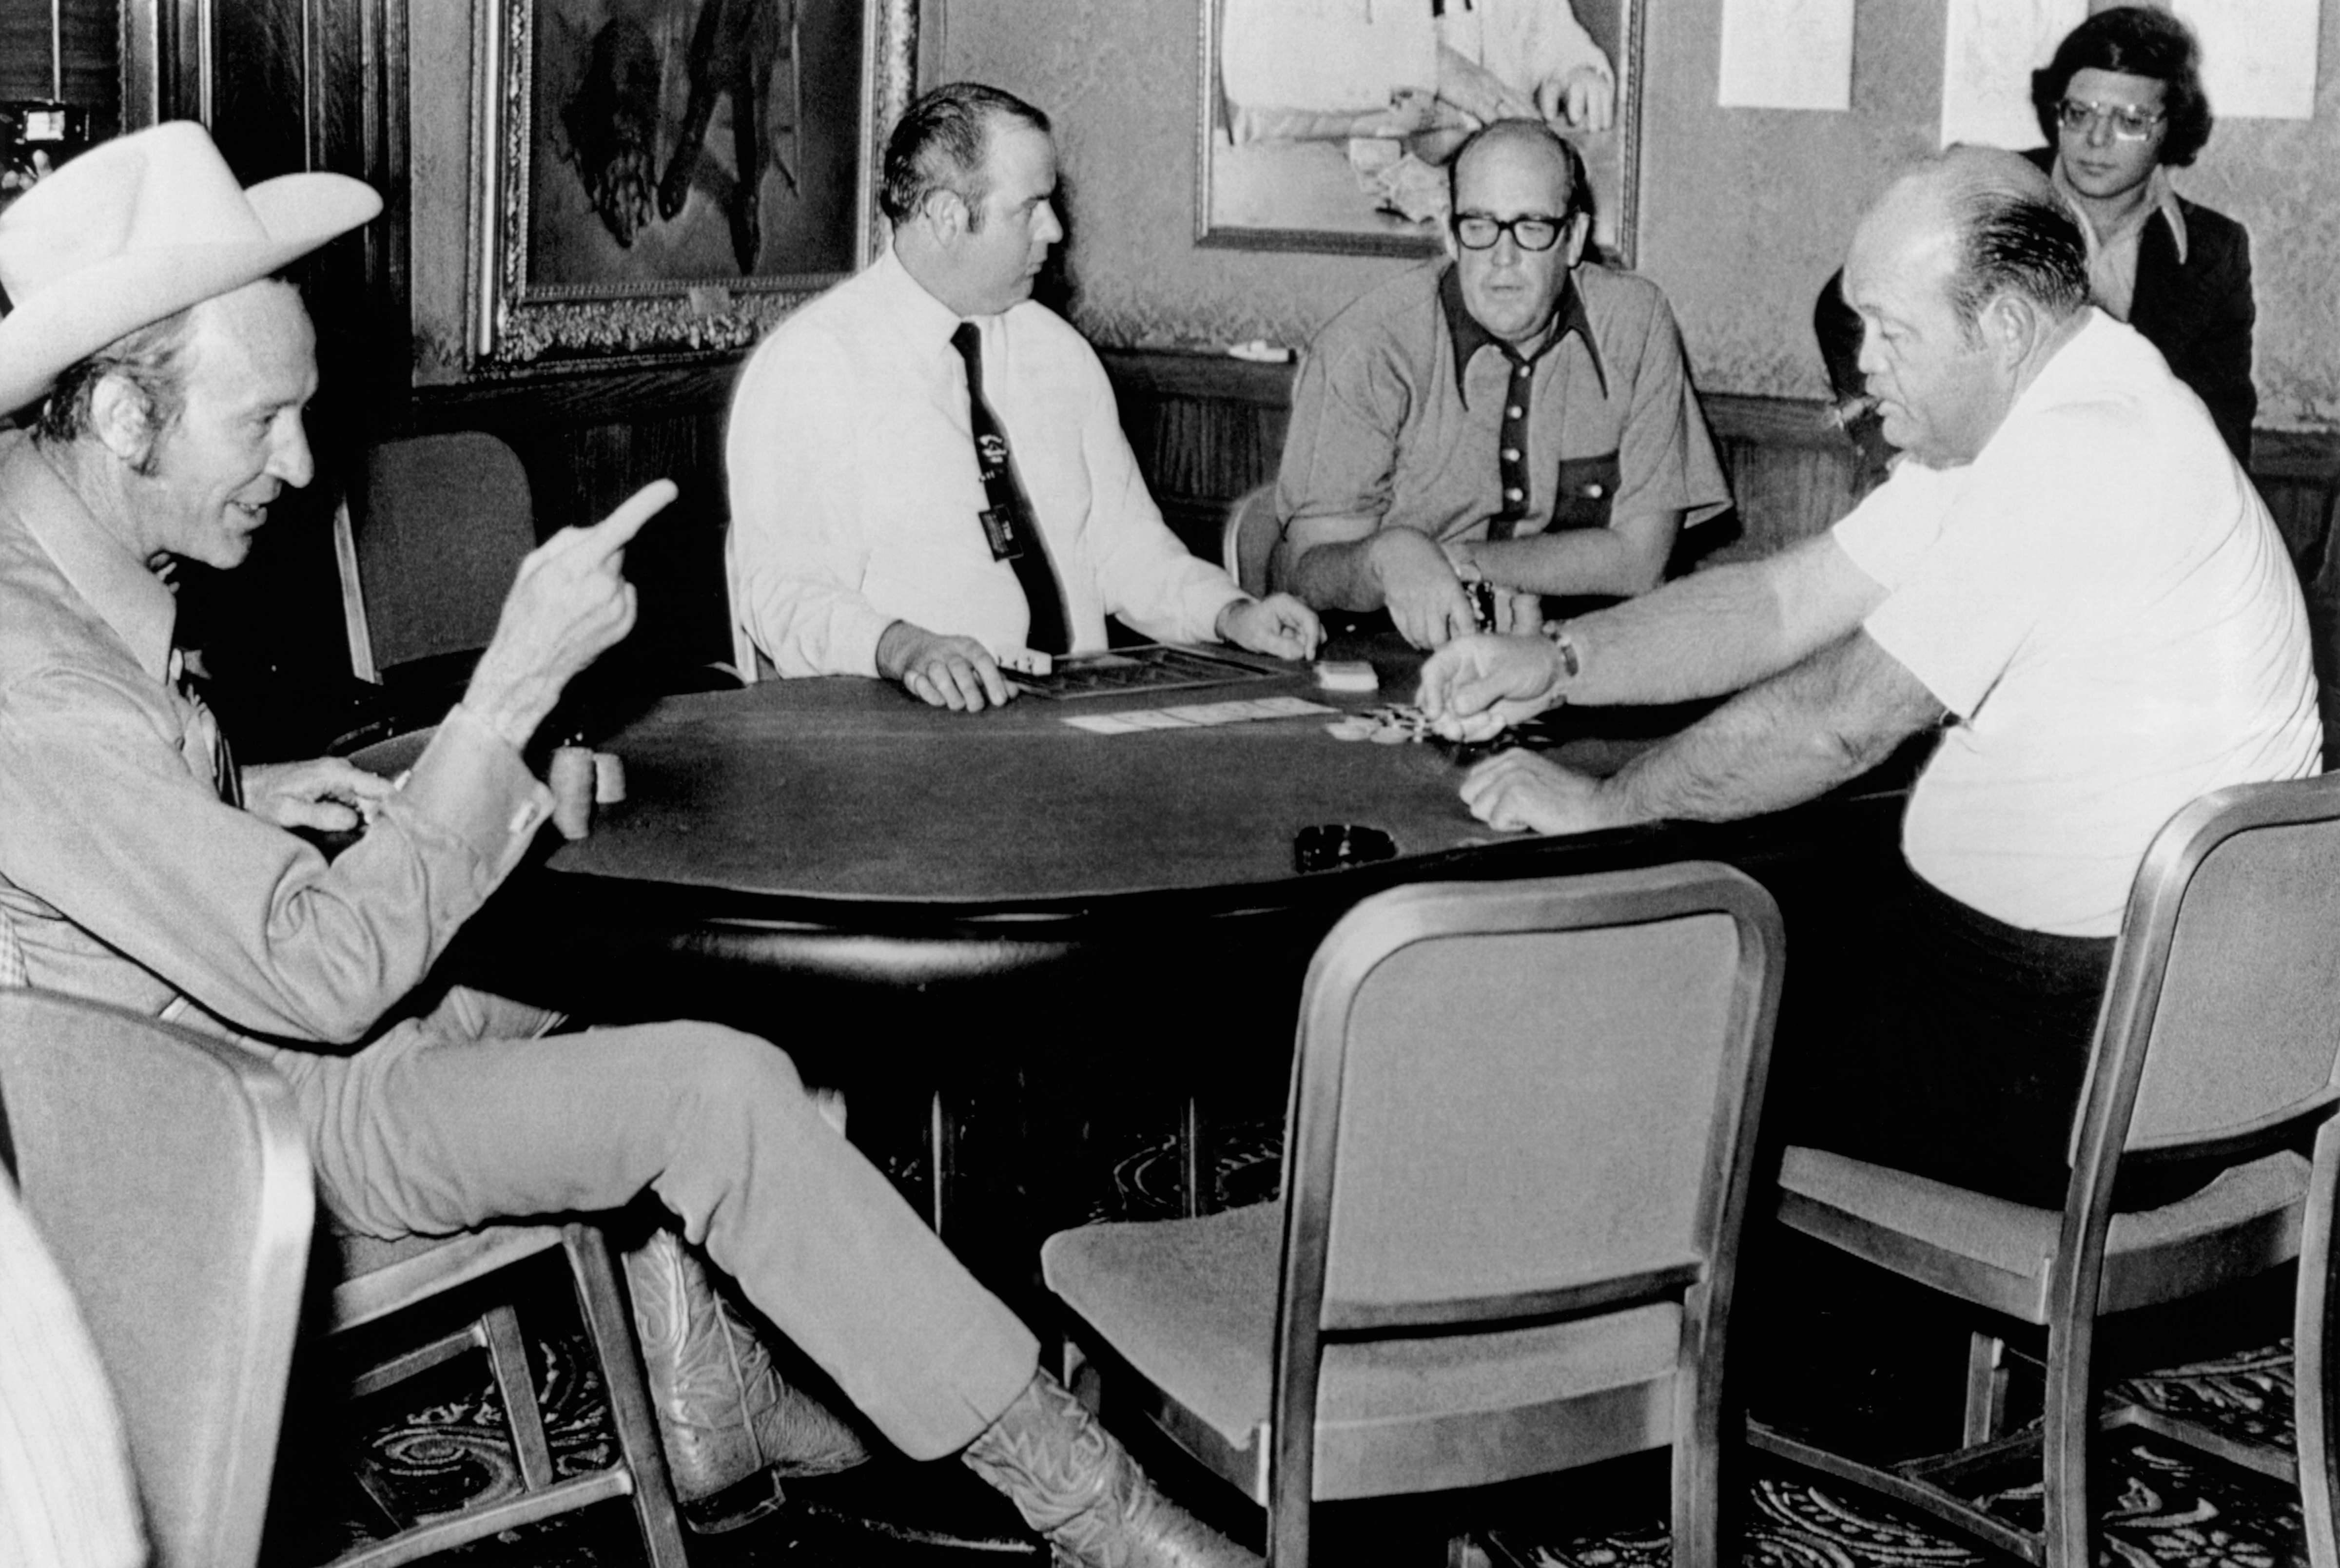 May 18 1972: Amarillo Slim, Puggy Pearson, and Doyle Brunson three handed for the WSOP Main Event title. (Image: Getty Images)